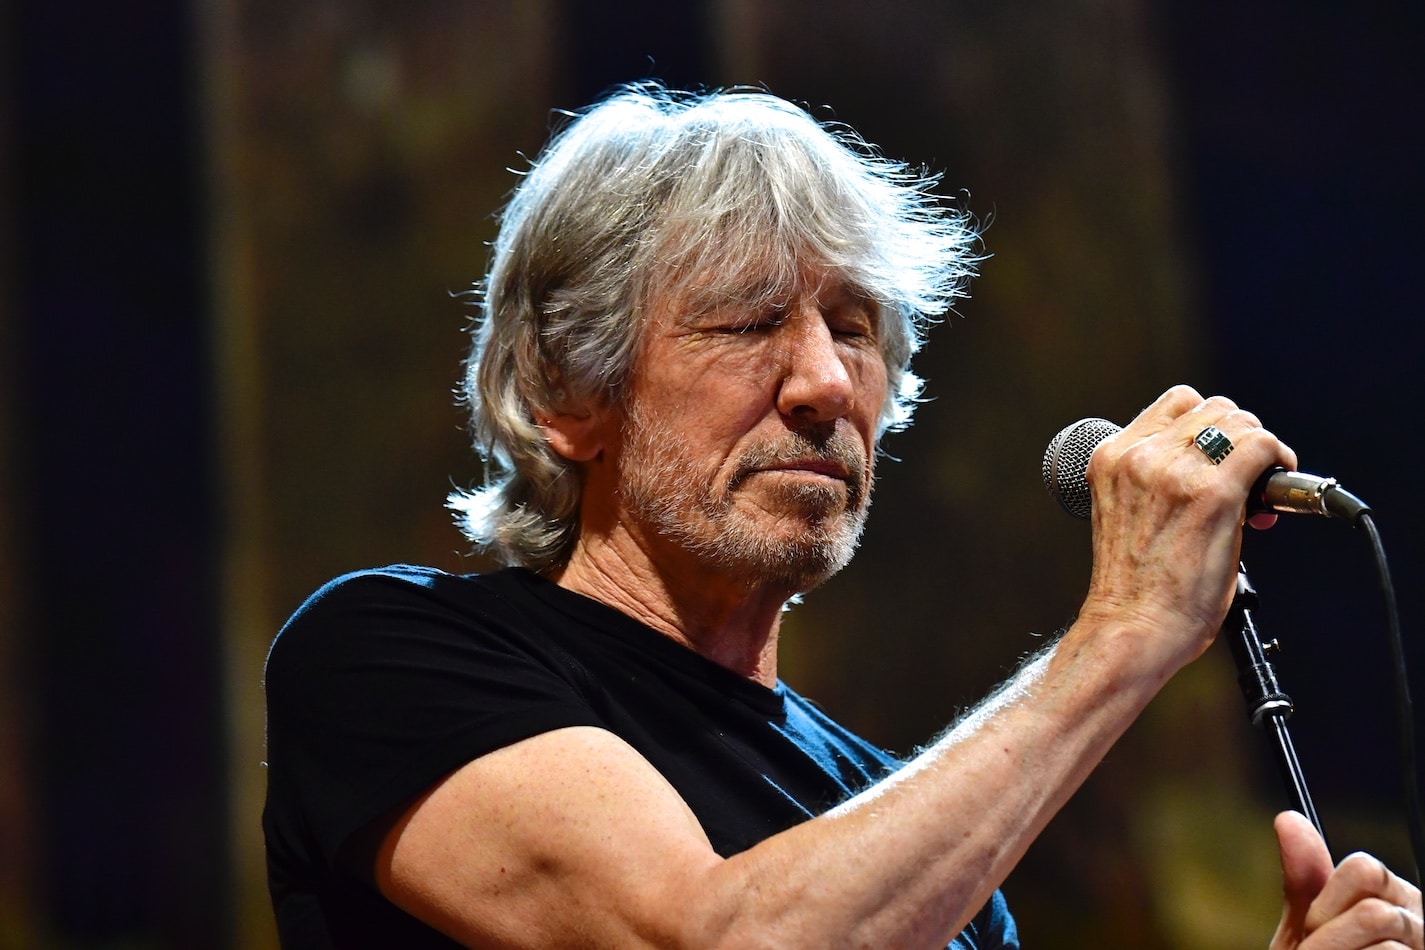 roger waters - photo #36